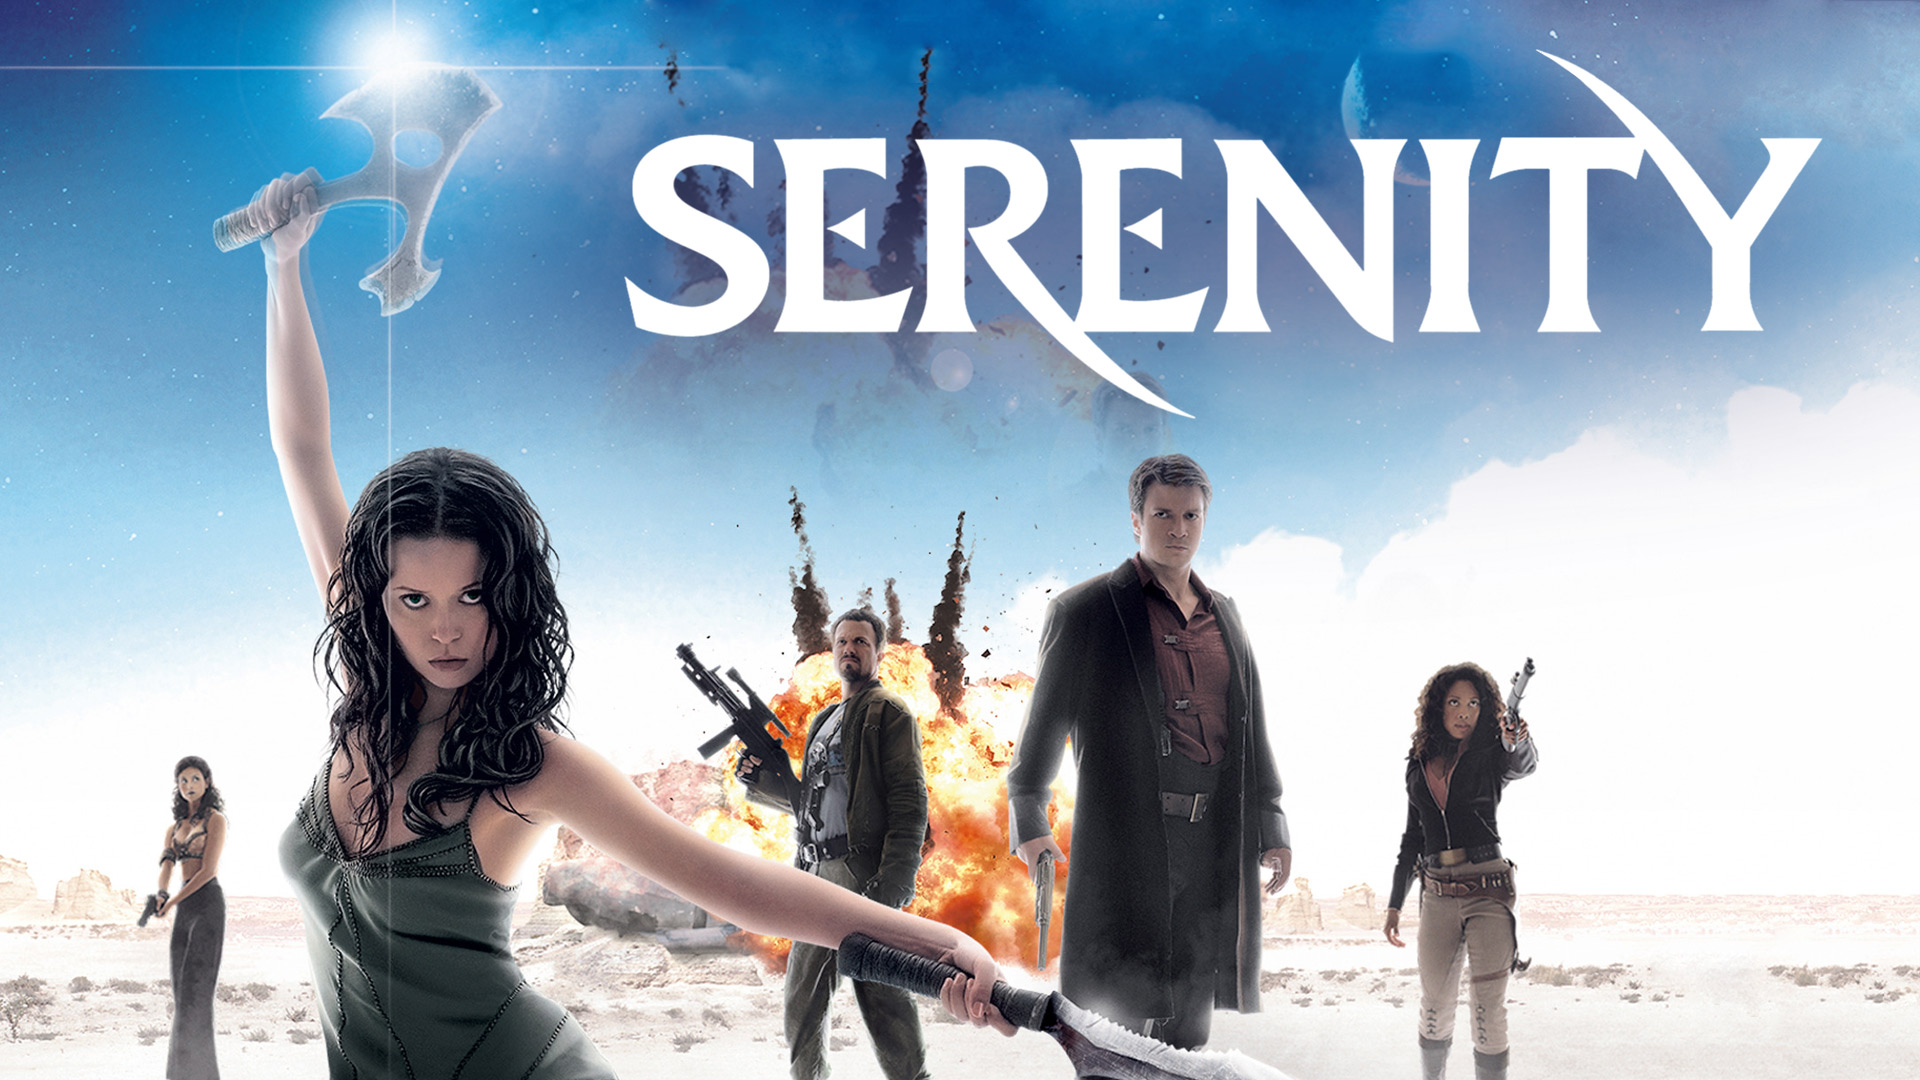 Serenity (2005) Wallpapers